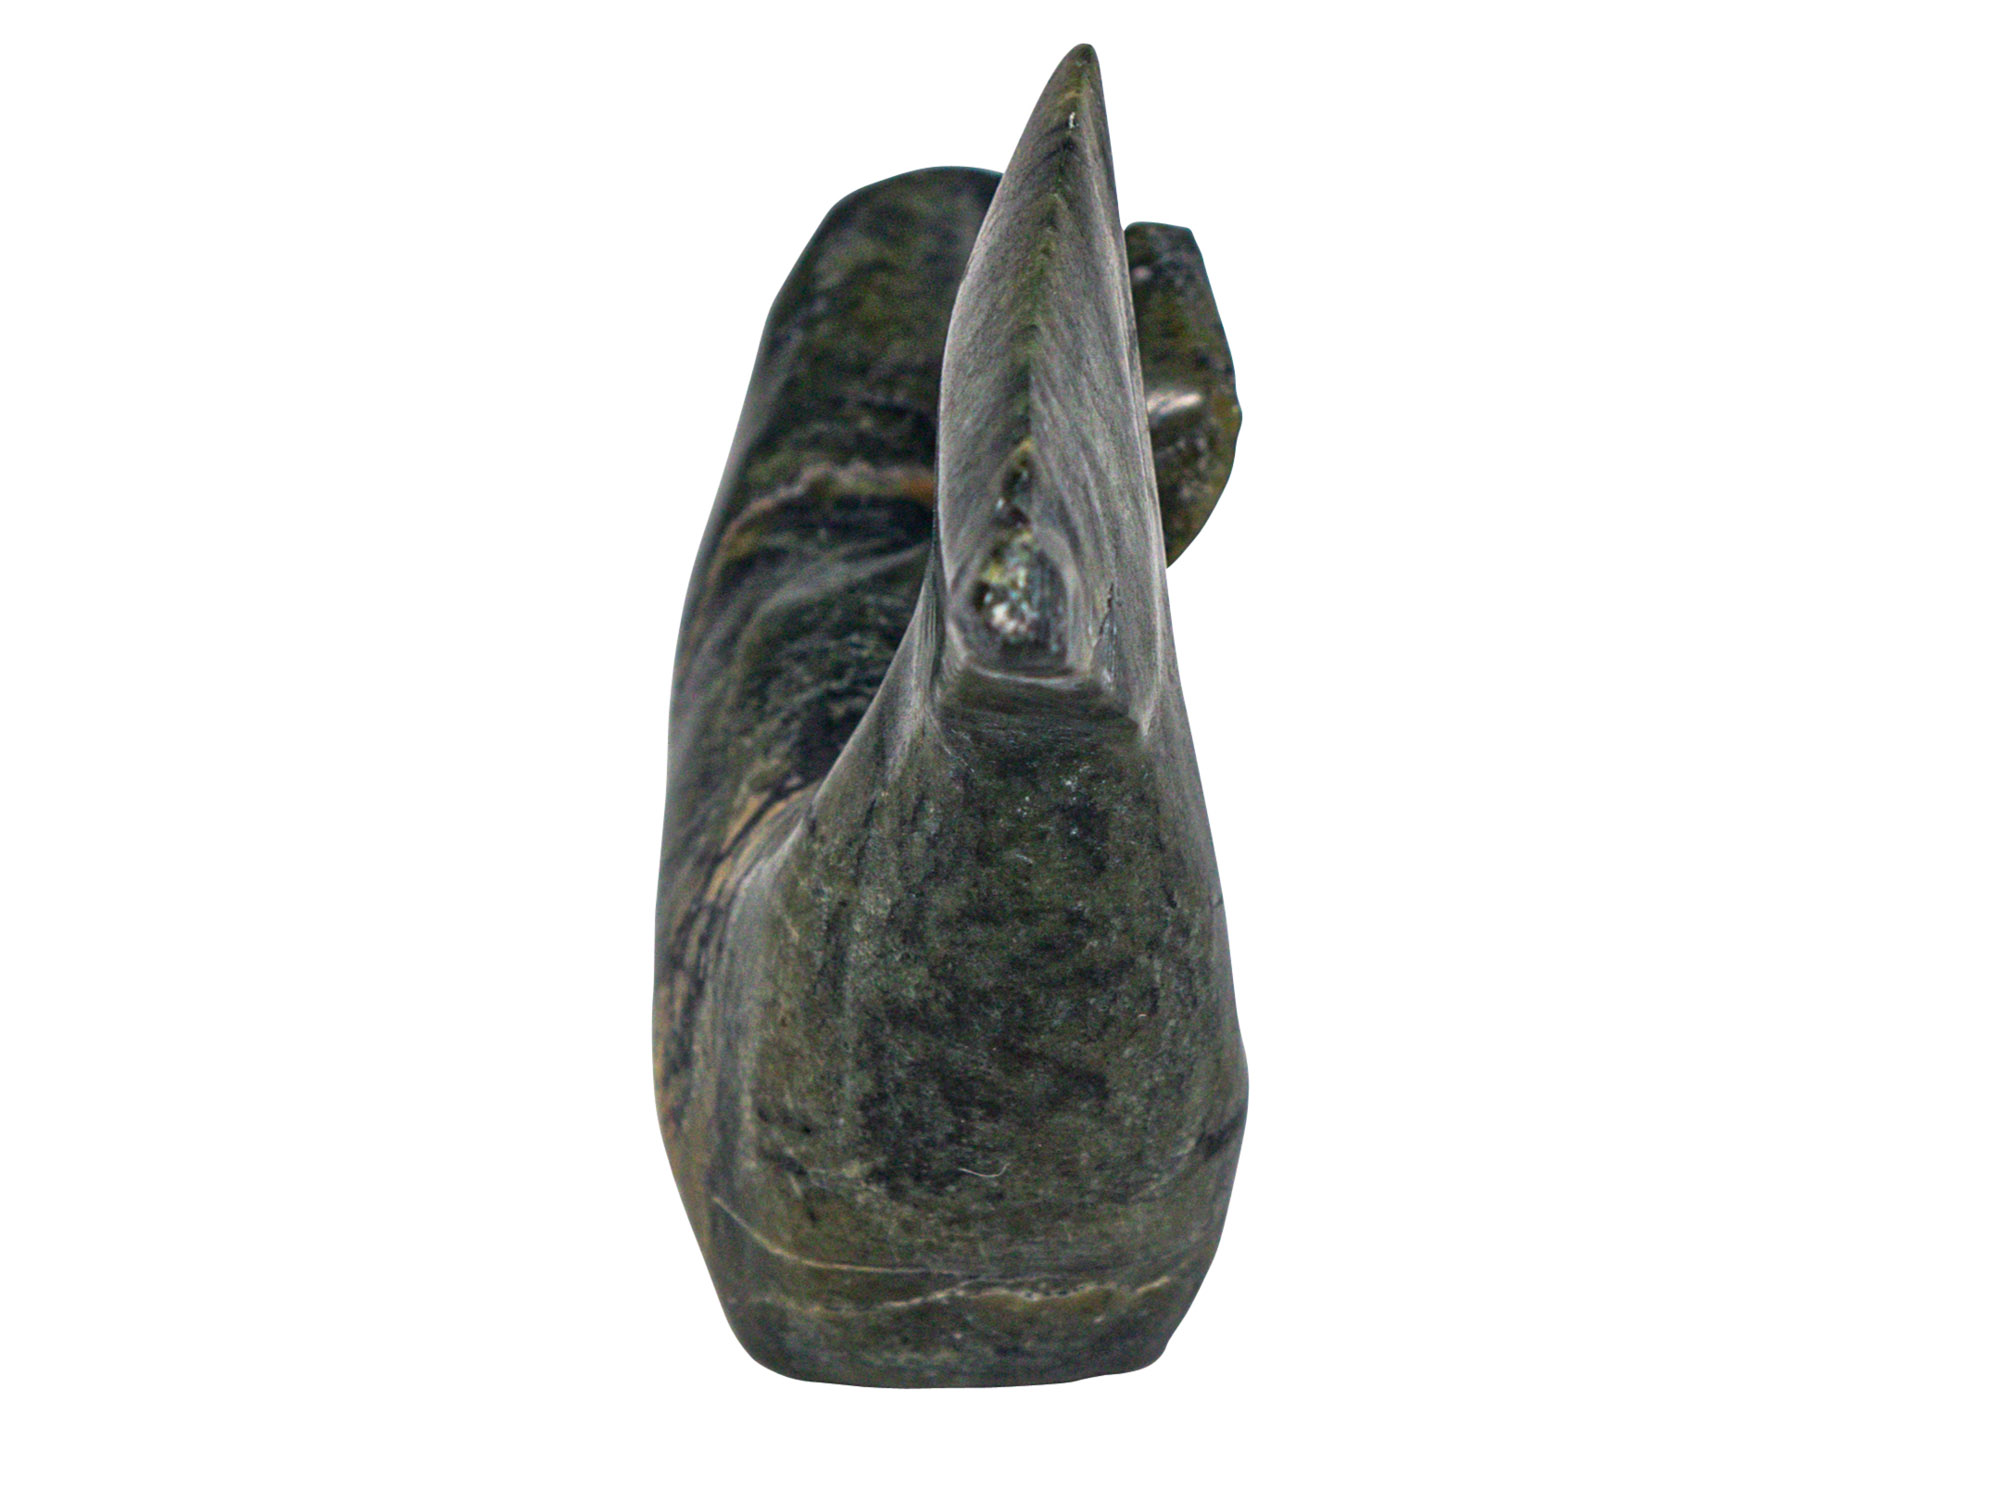 Inuit Soapstone Carving: Whale: Gallery Item - 44-G19 (10URM1)